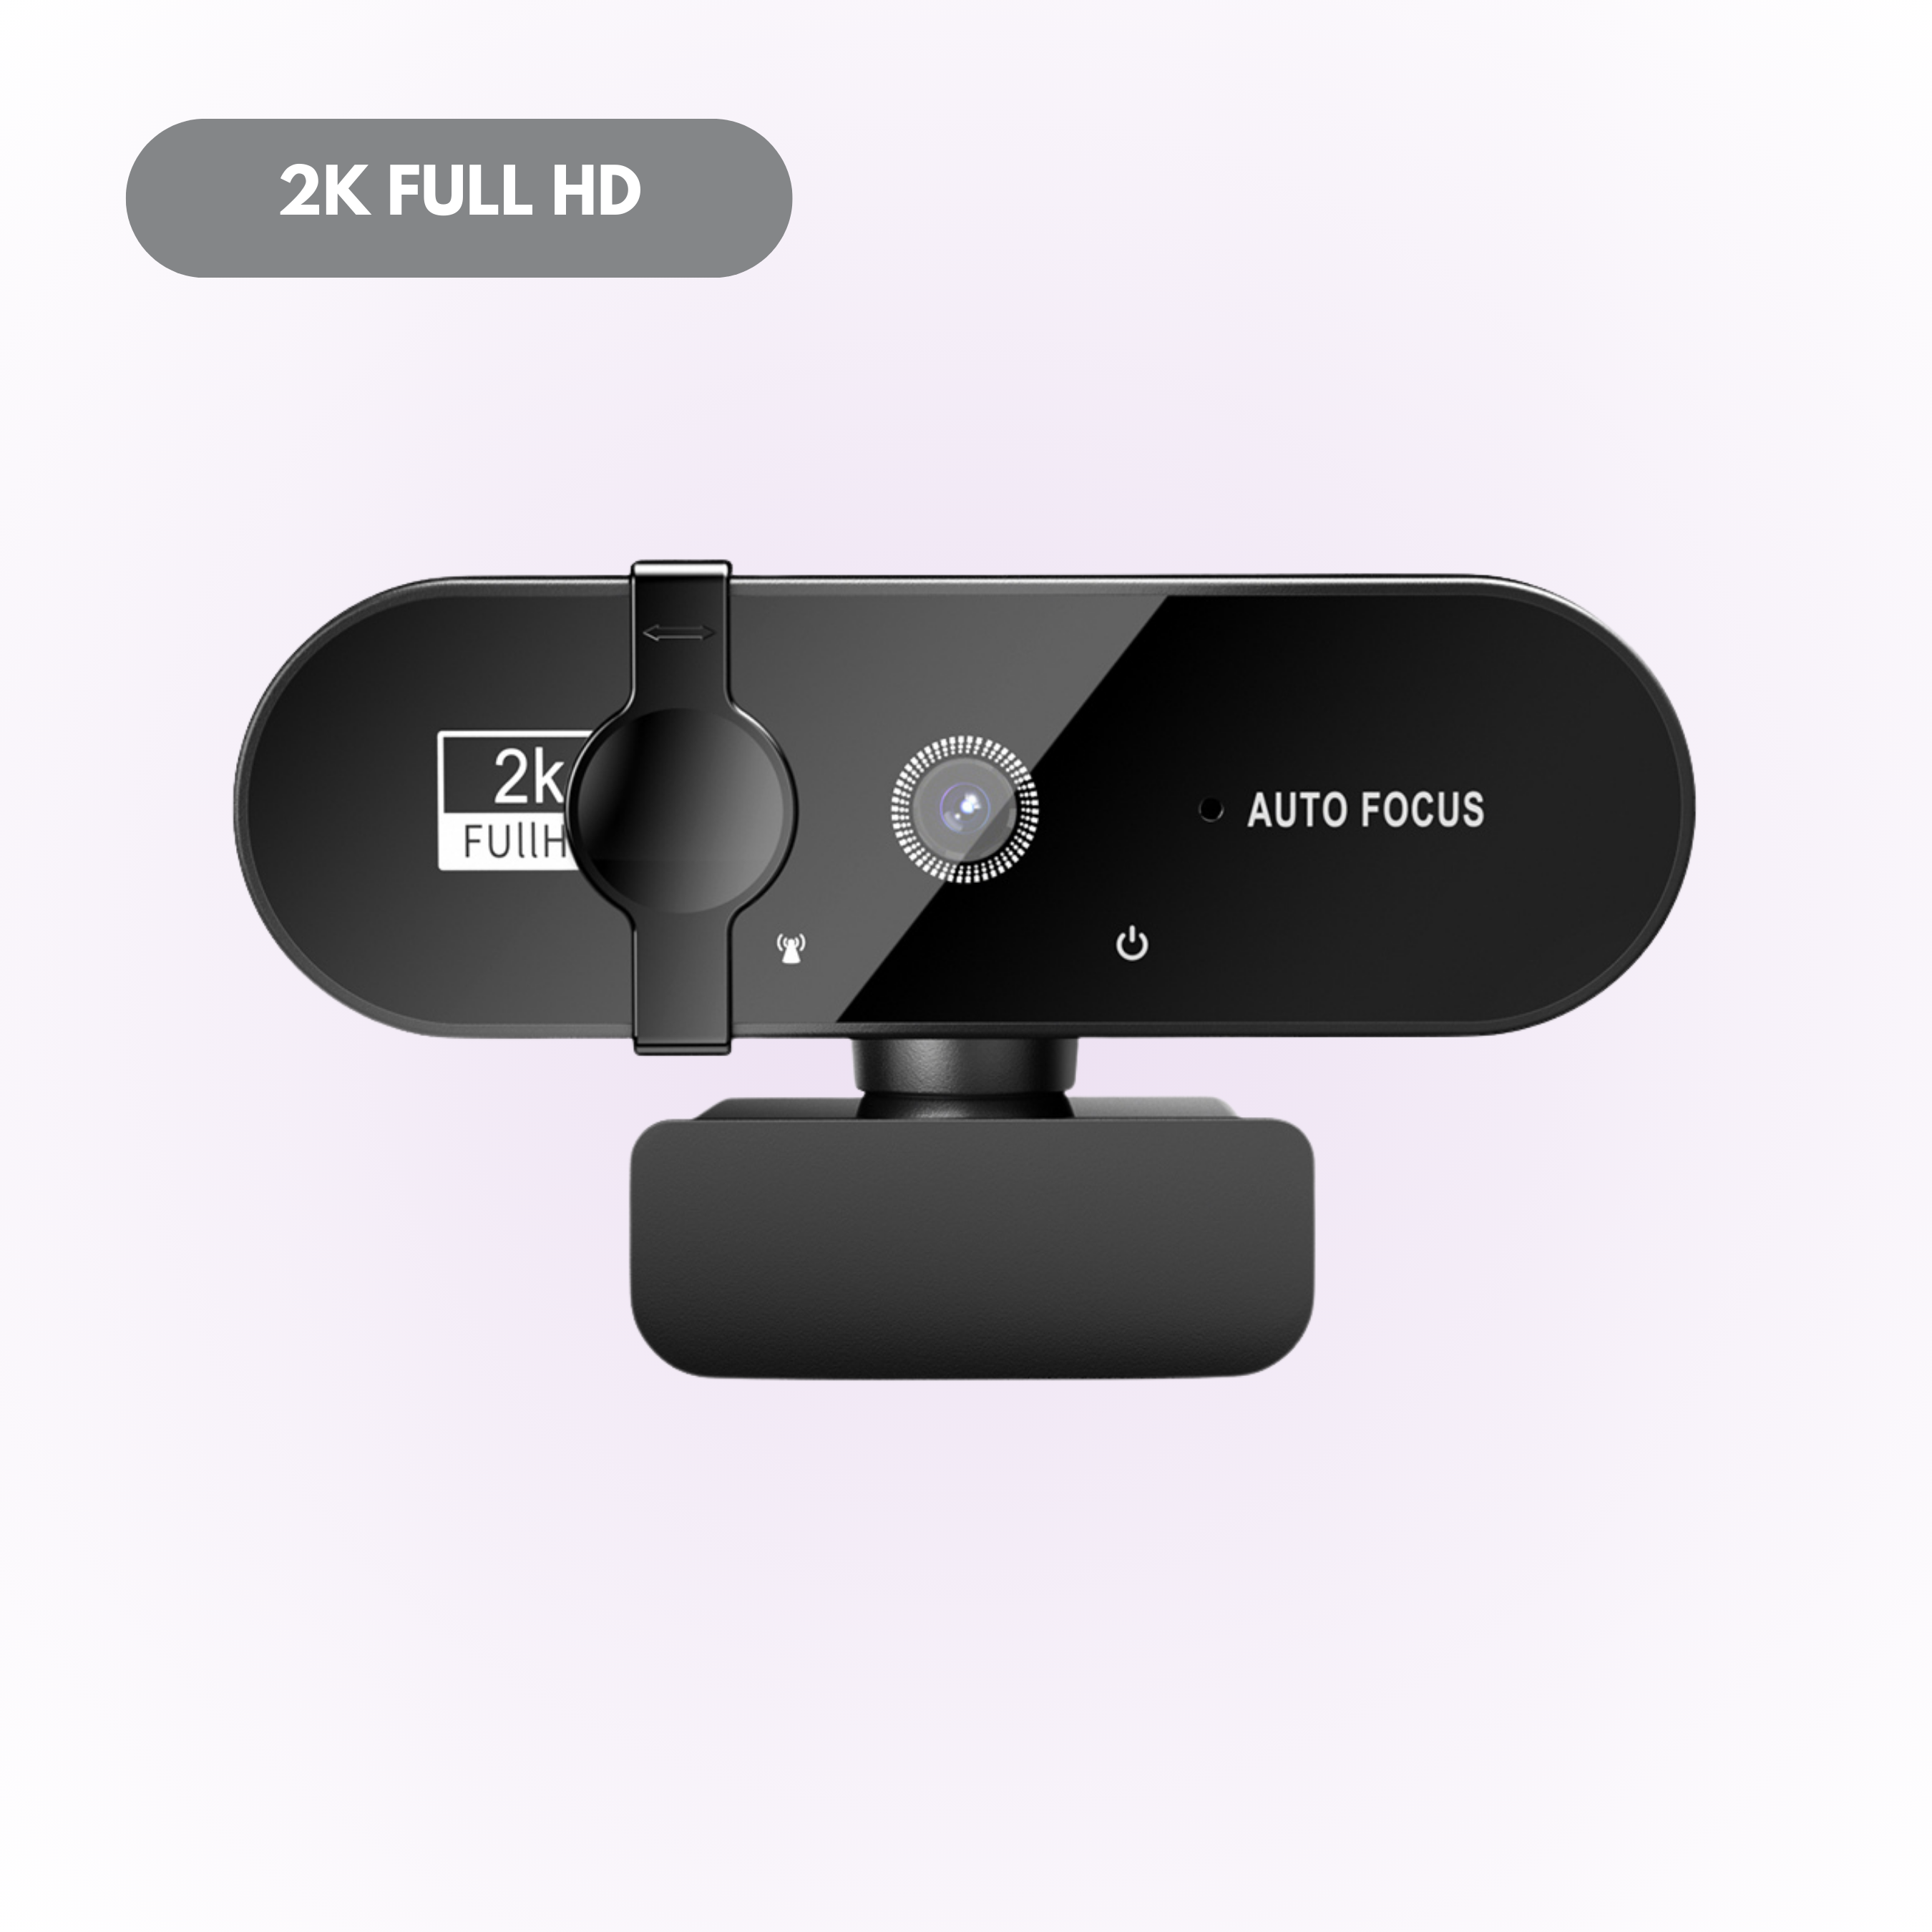 2k full hd Webcam with Built-in Microphone